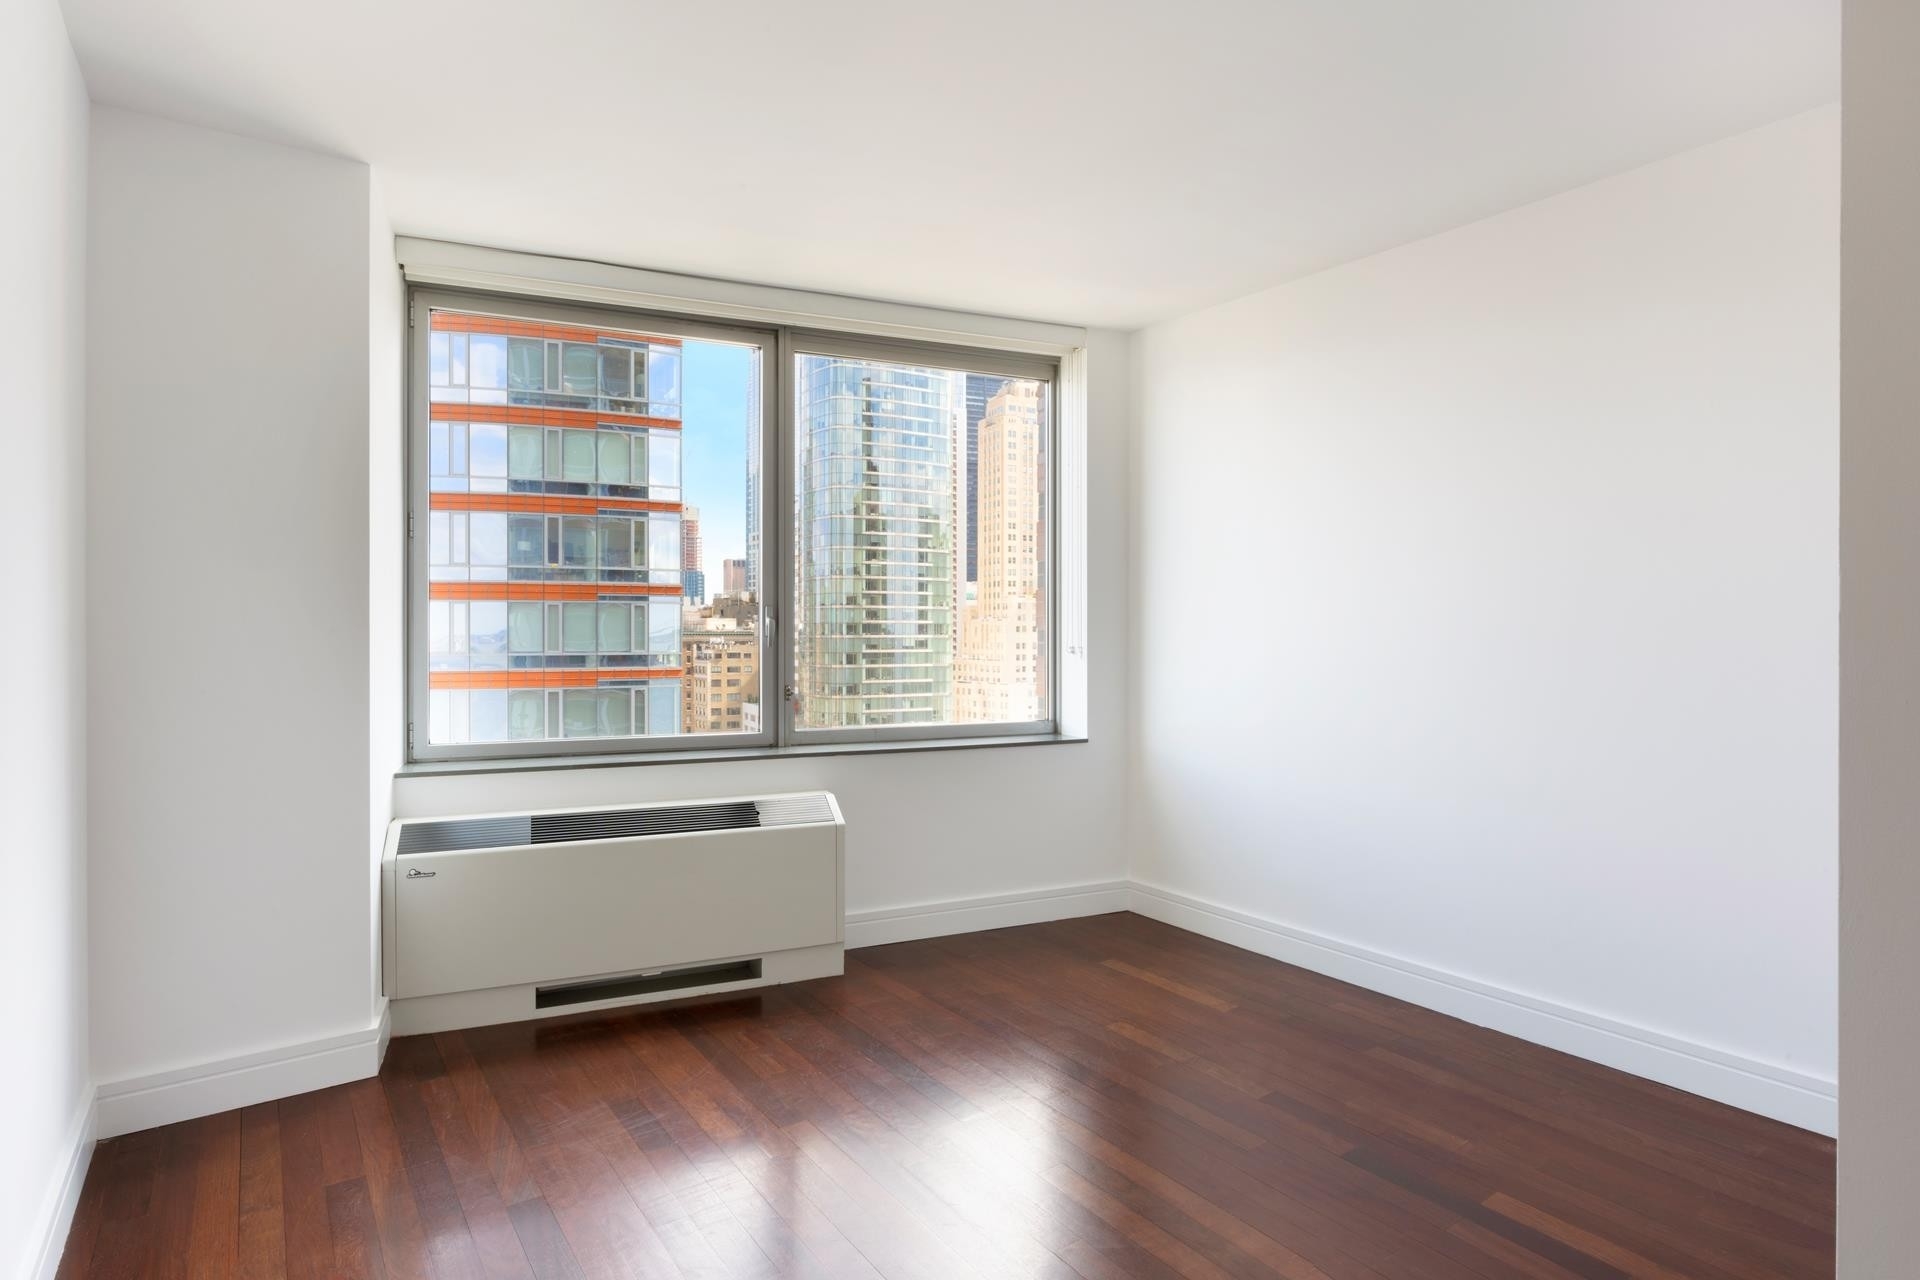 10. Rentals at Millennium Towers R, 30 WEST ST, 21AB New York